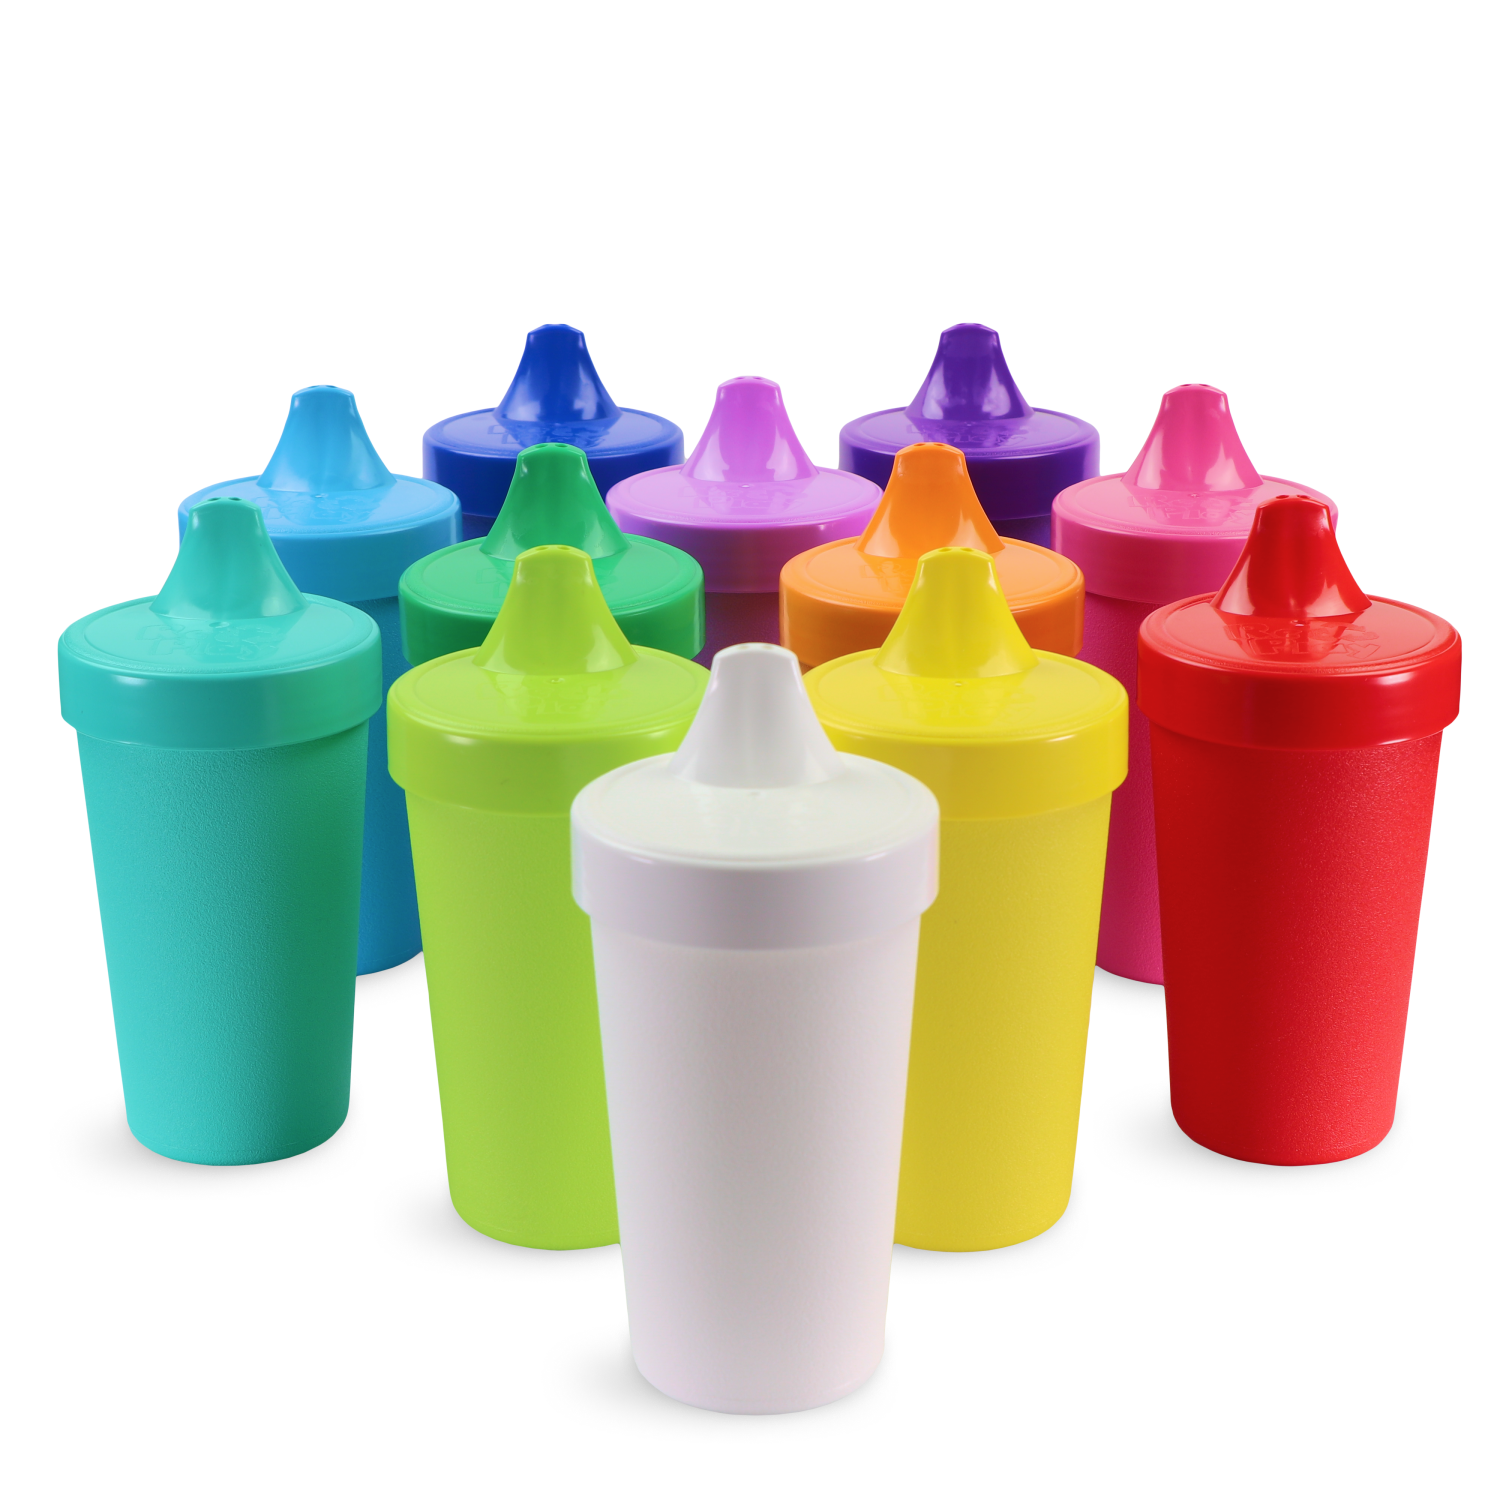 Re Play Made in USA 2 Pack Sippy Cups for Toddlers, 10 Oz. - Reusable Spill  Proof Cups for Kids, Dis…See more Re Play Made in USA 2 Pack Sippy Cups